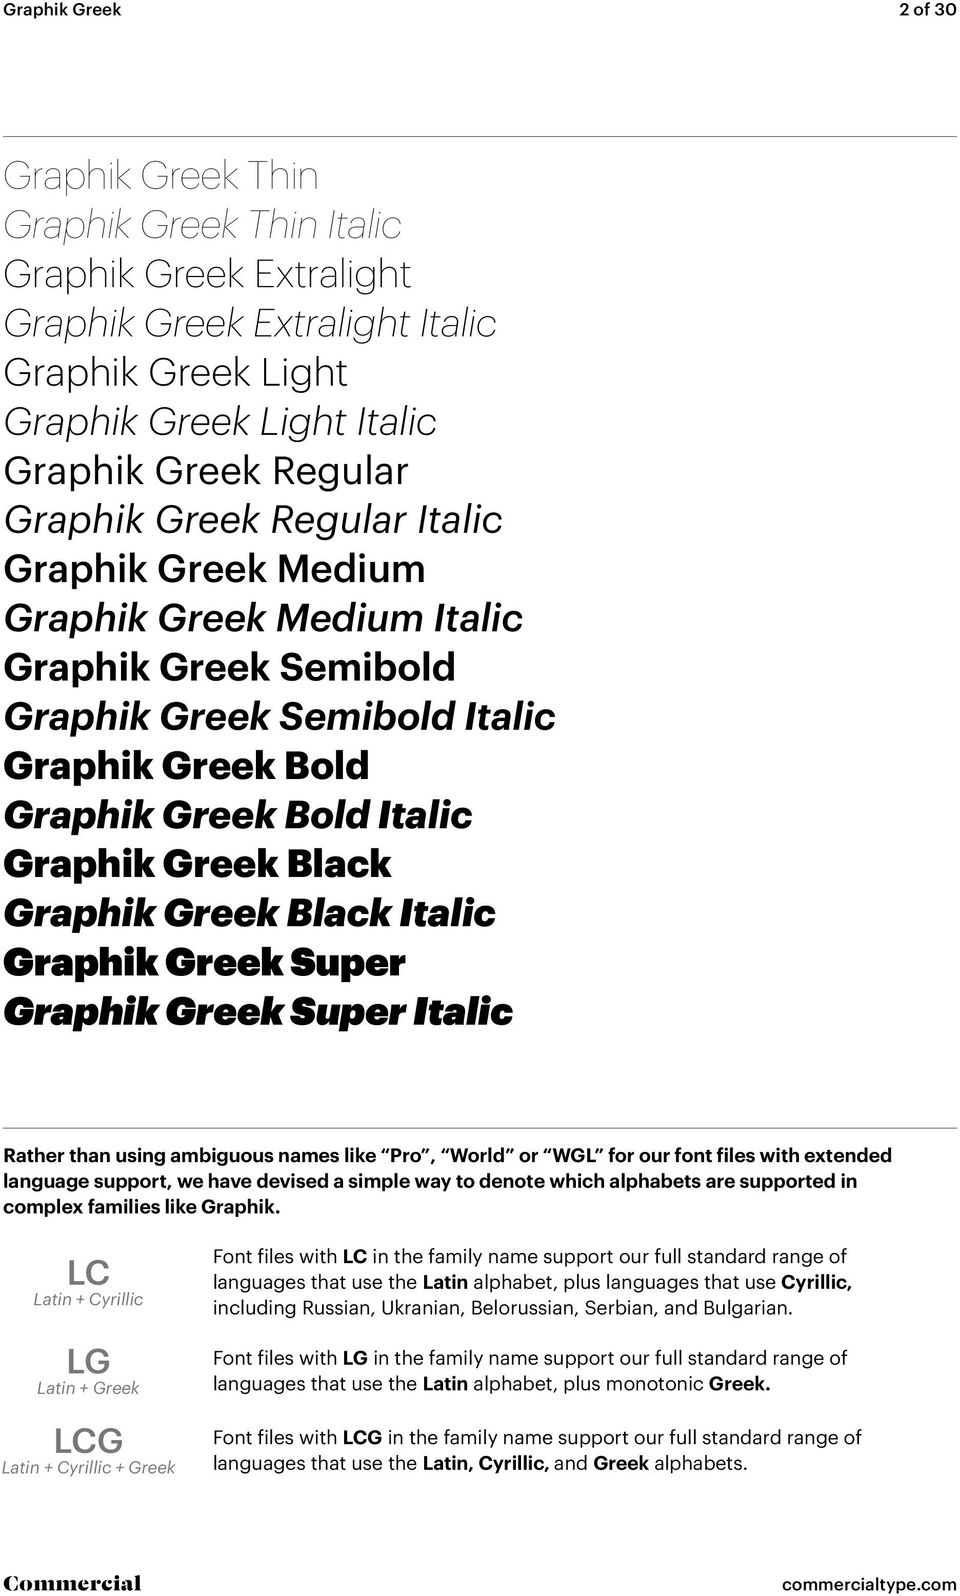 Graphik Greek Black Italic Graphik Greek Super Graphik Greek Super Italic Rather than using ambiguous names like Pro, World or WGL for our font files with extended language support, we have devised a